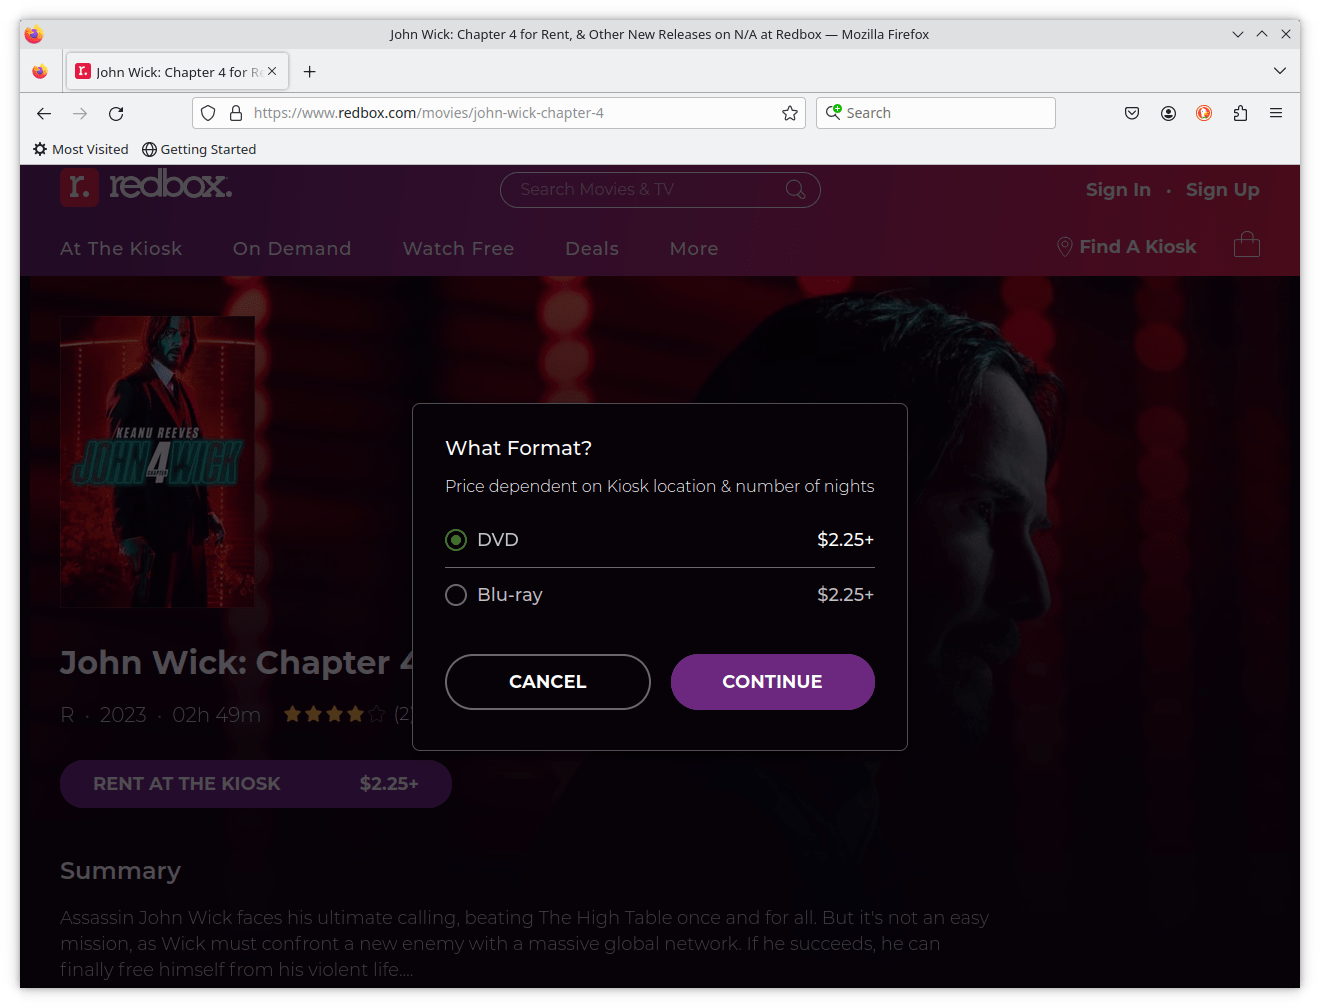 John Wick 4 available for Rent at Redbox (DVD or Blu-Ray selection)